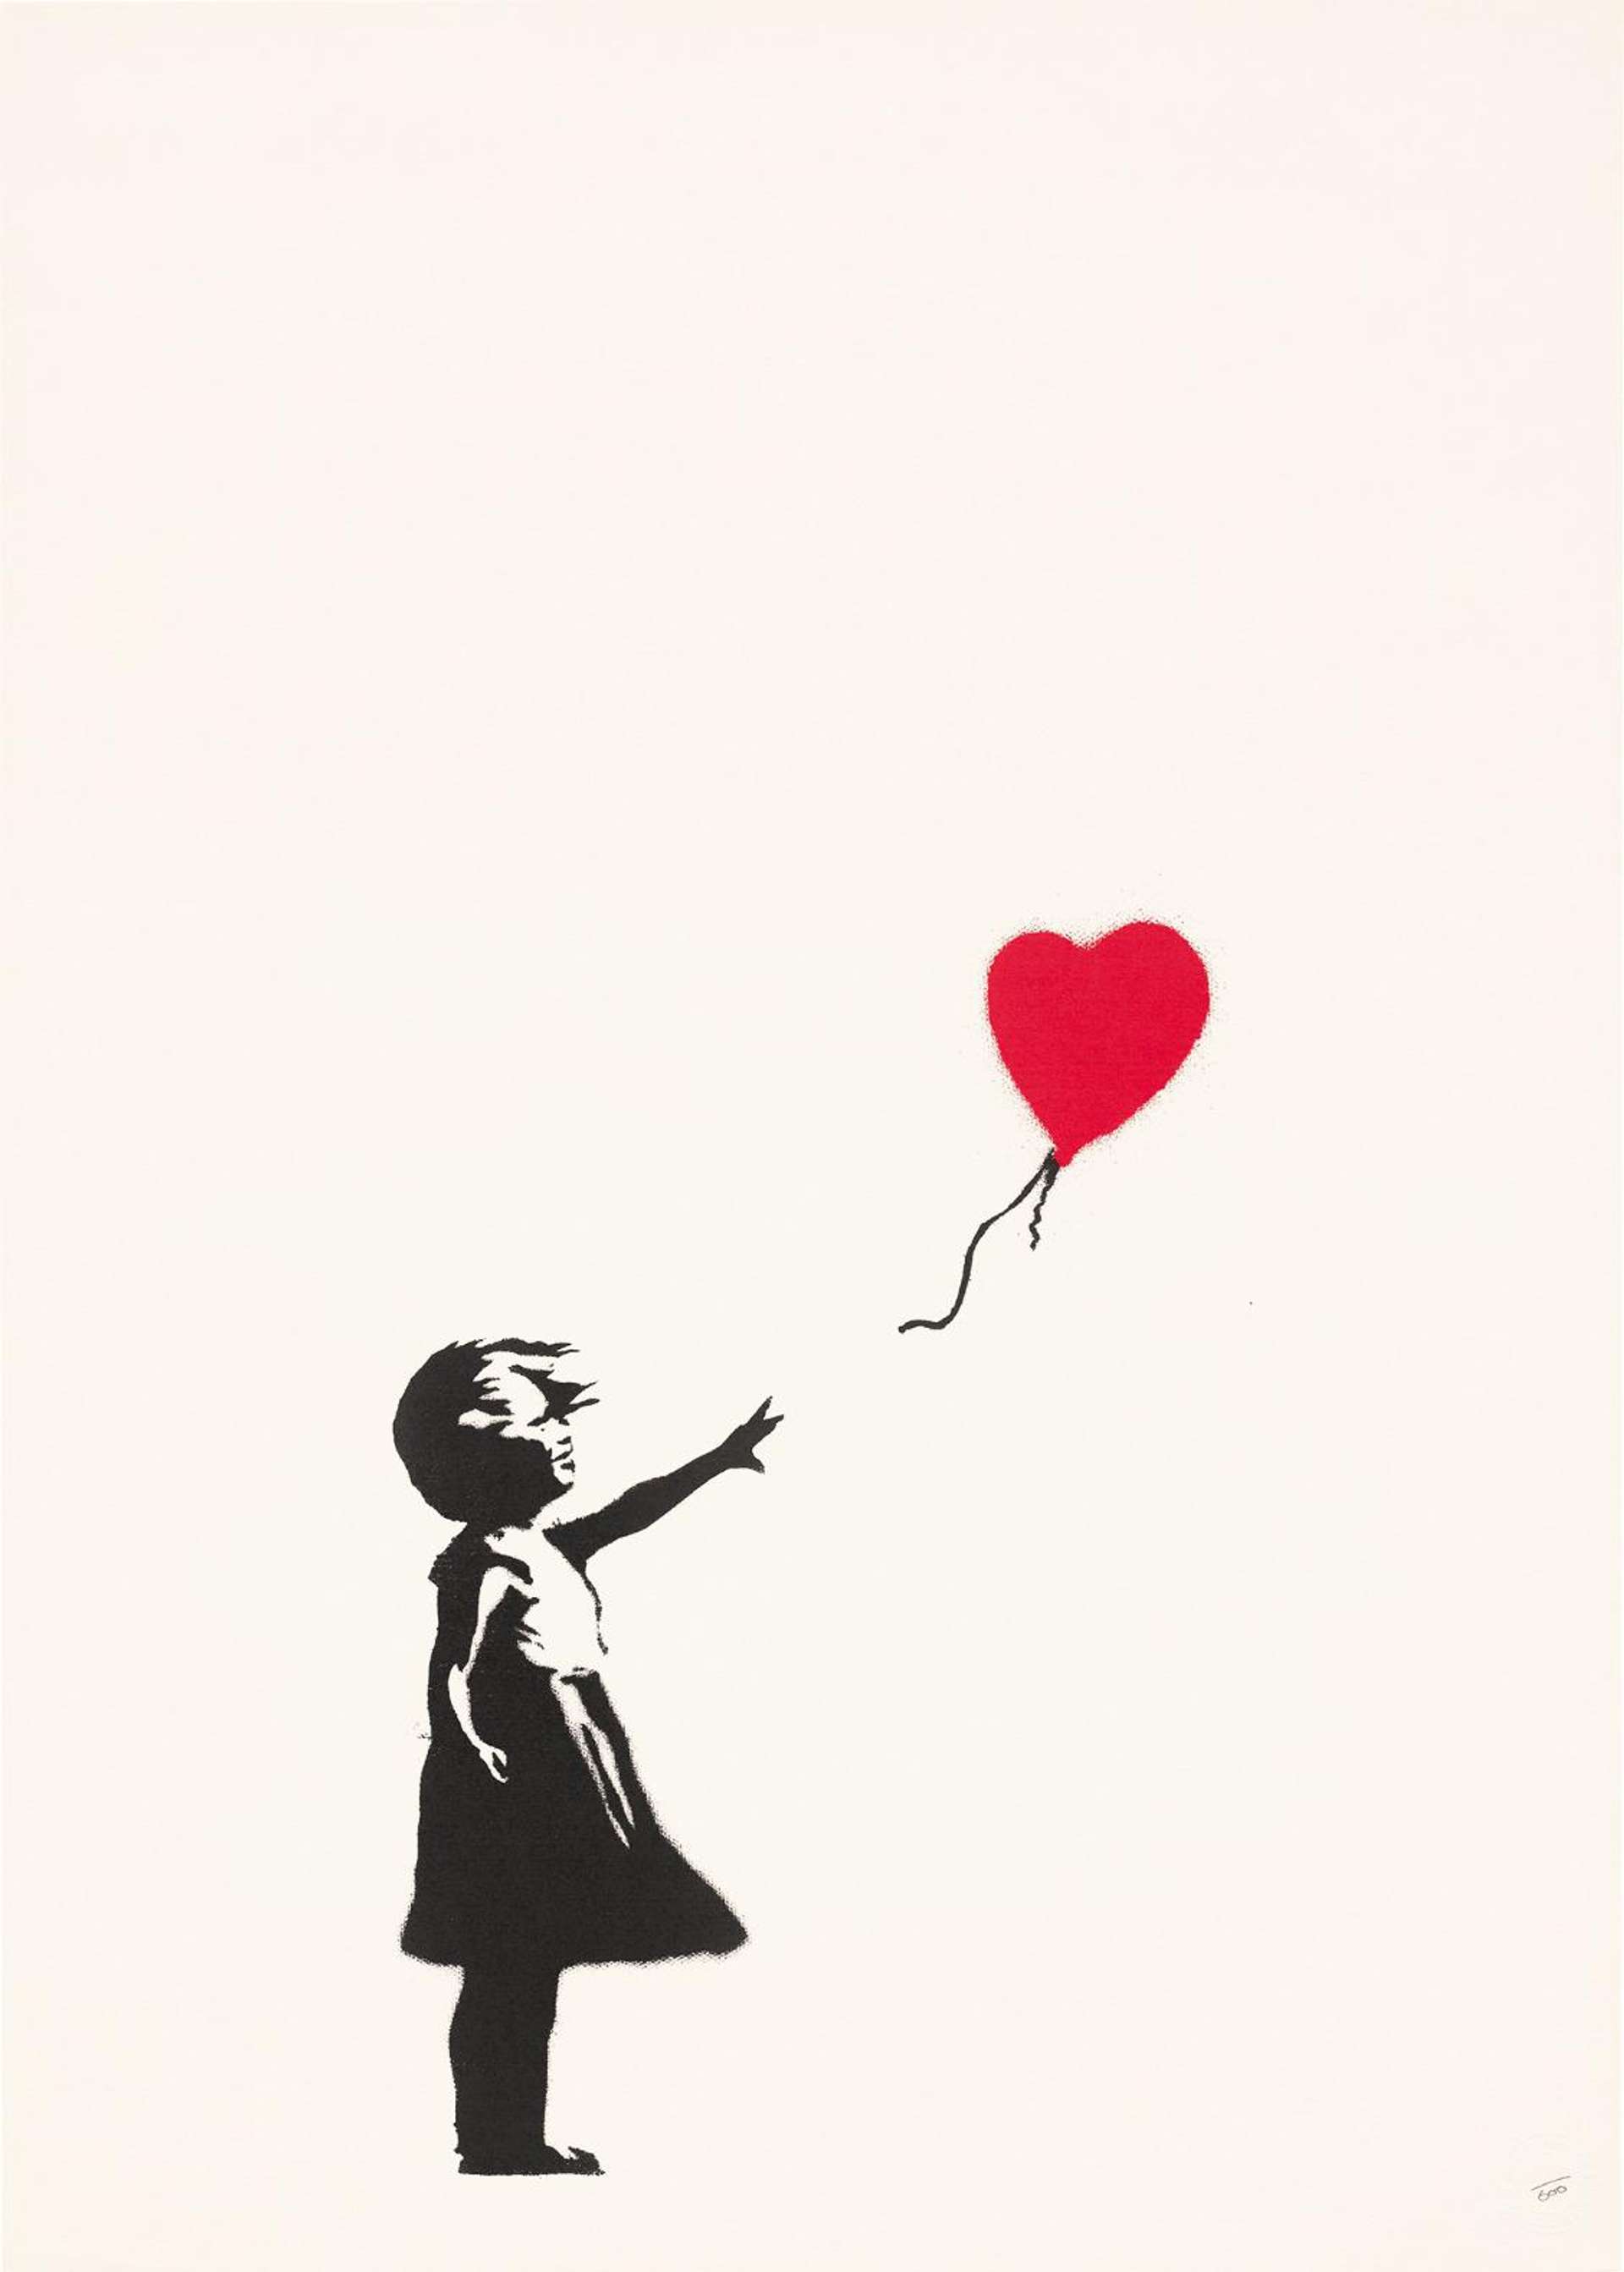 A screenprint by Banksy depicting a young girl in black ink against an off-white background, reaching for a red balloon in the shape of a heart.